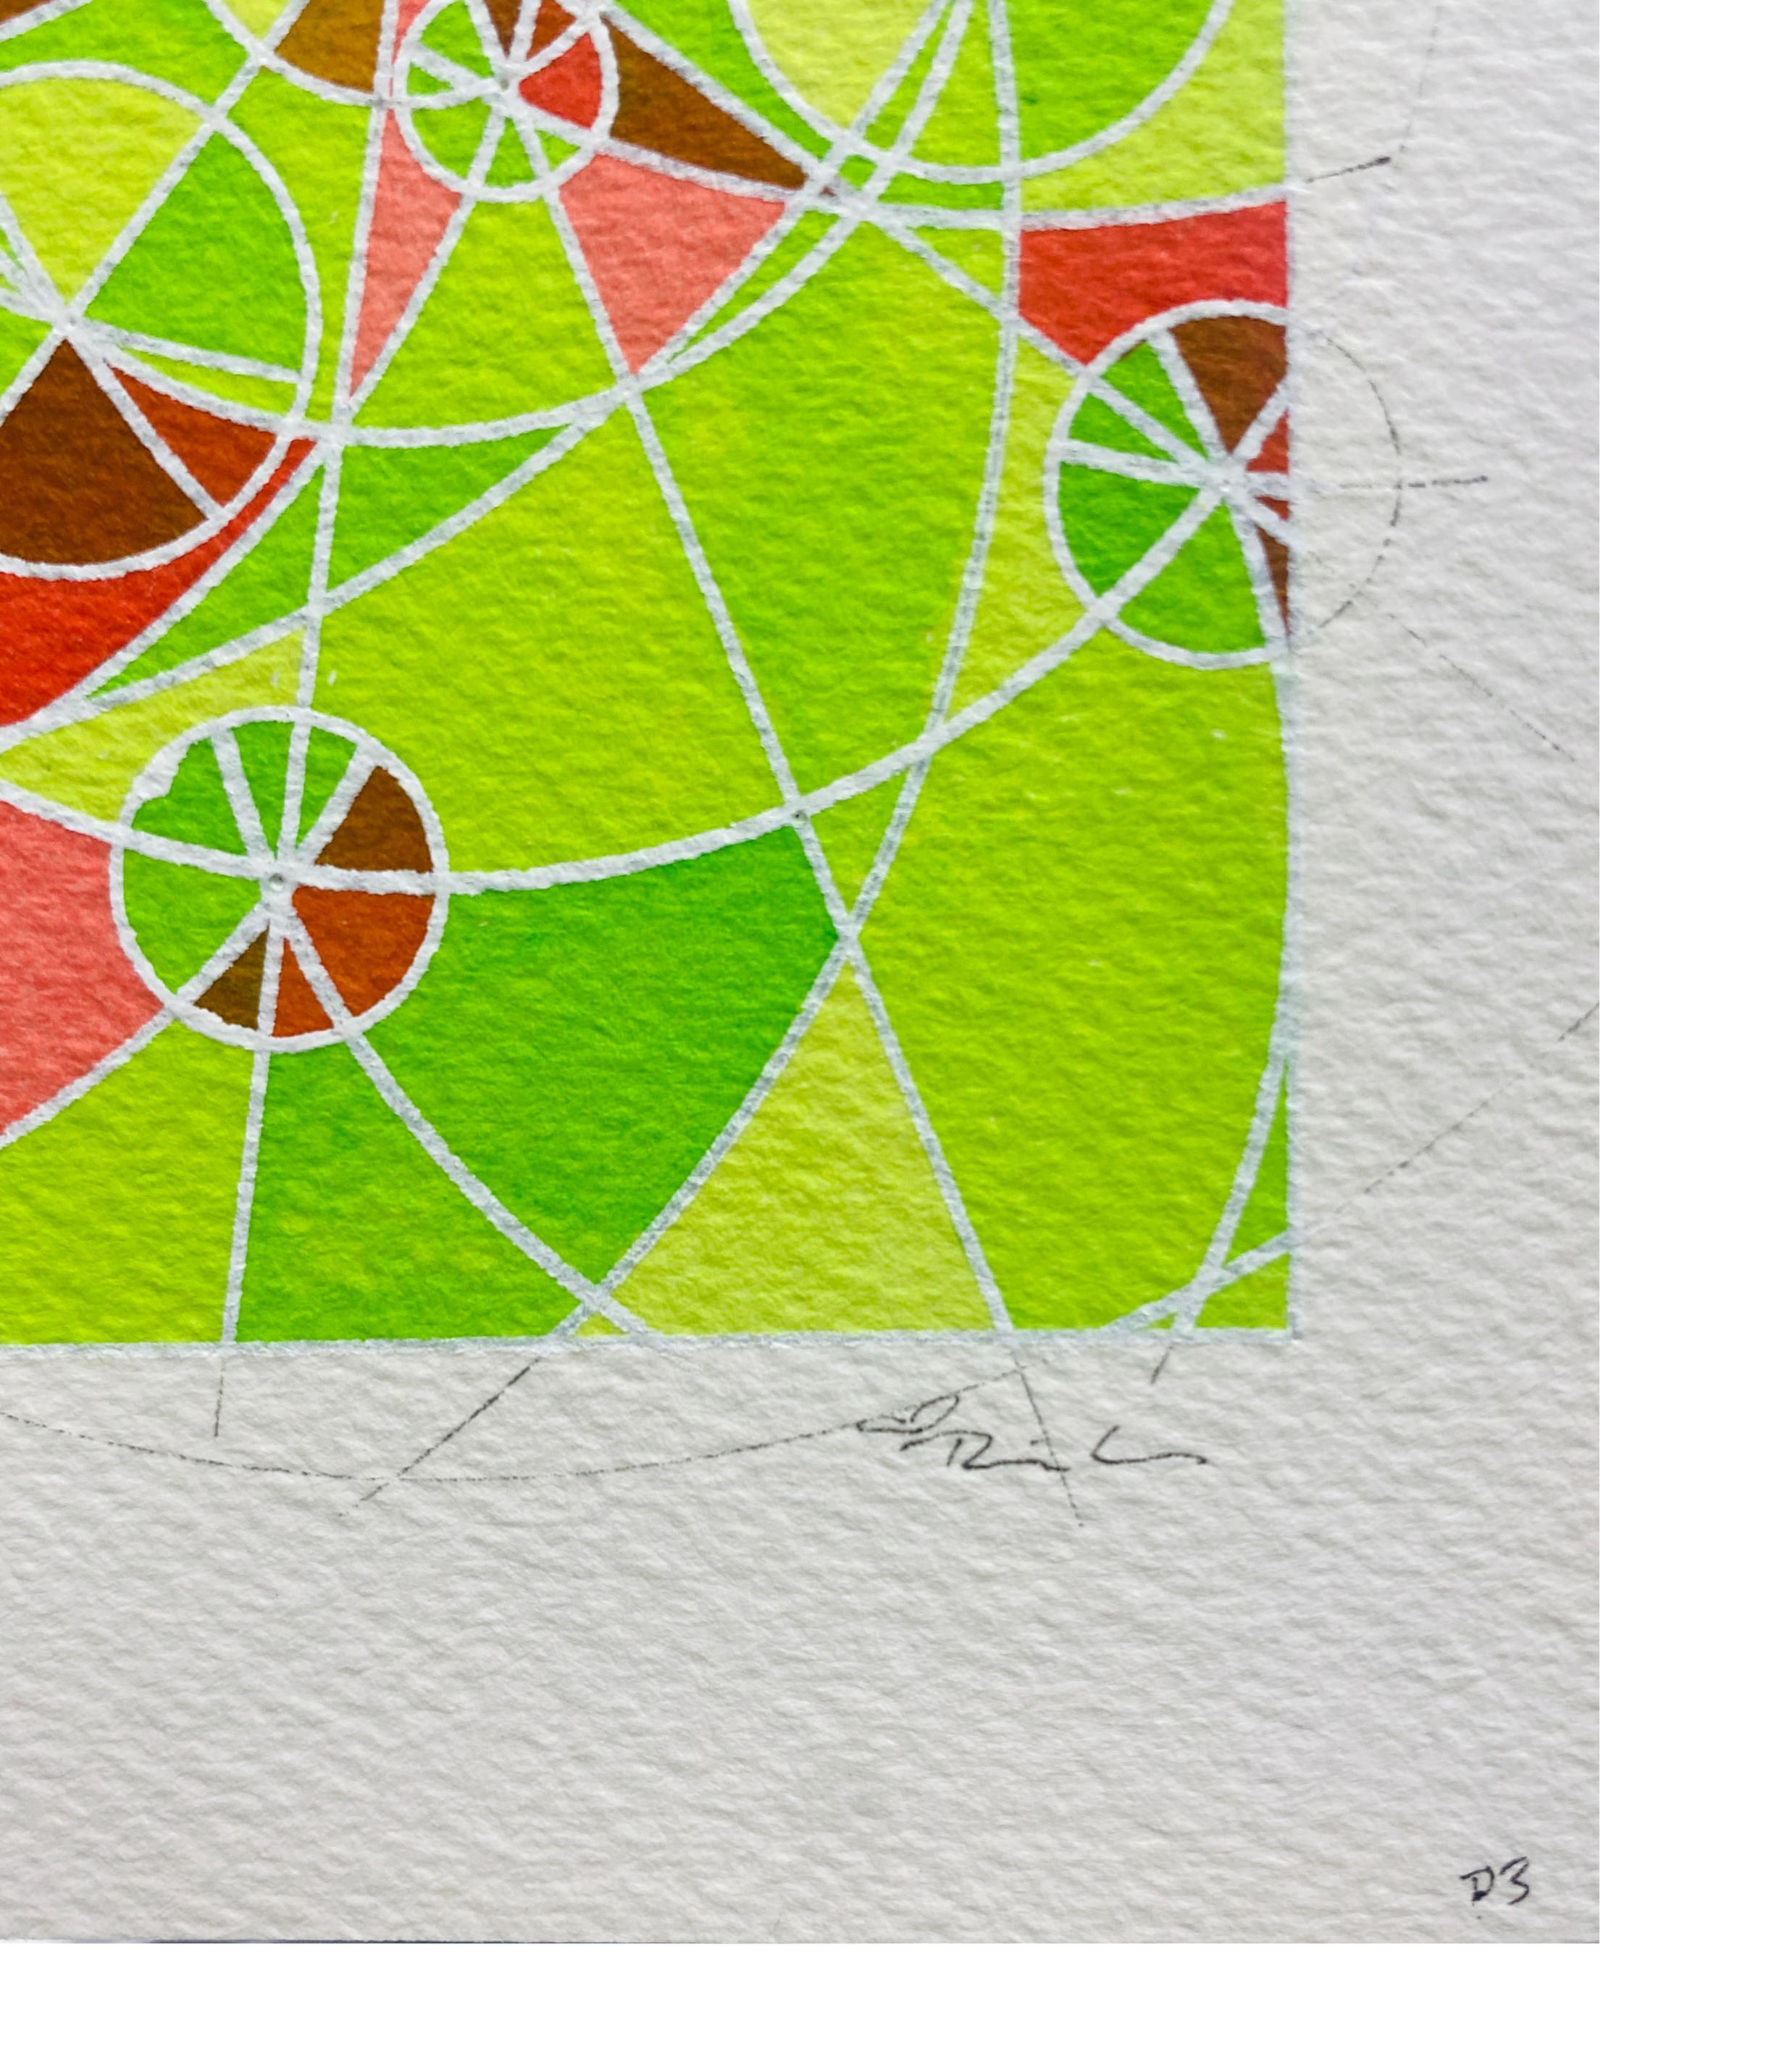 Sour Apples, Contemporary Geometric Abstract Drawing, Ink on Paper, Small  2